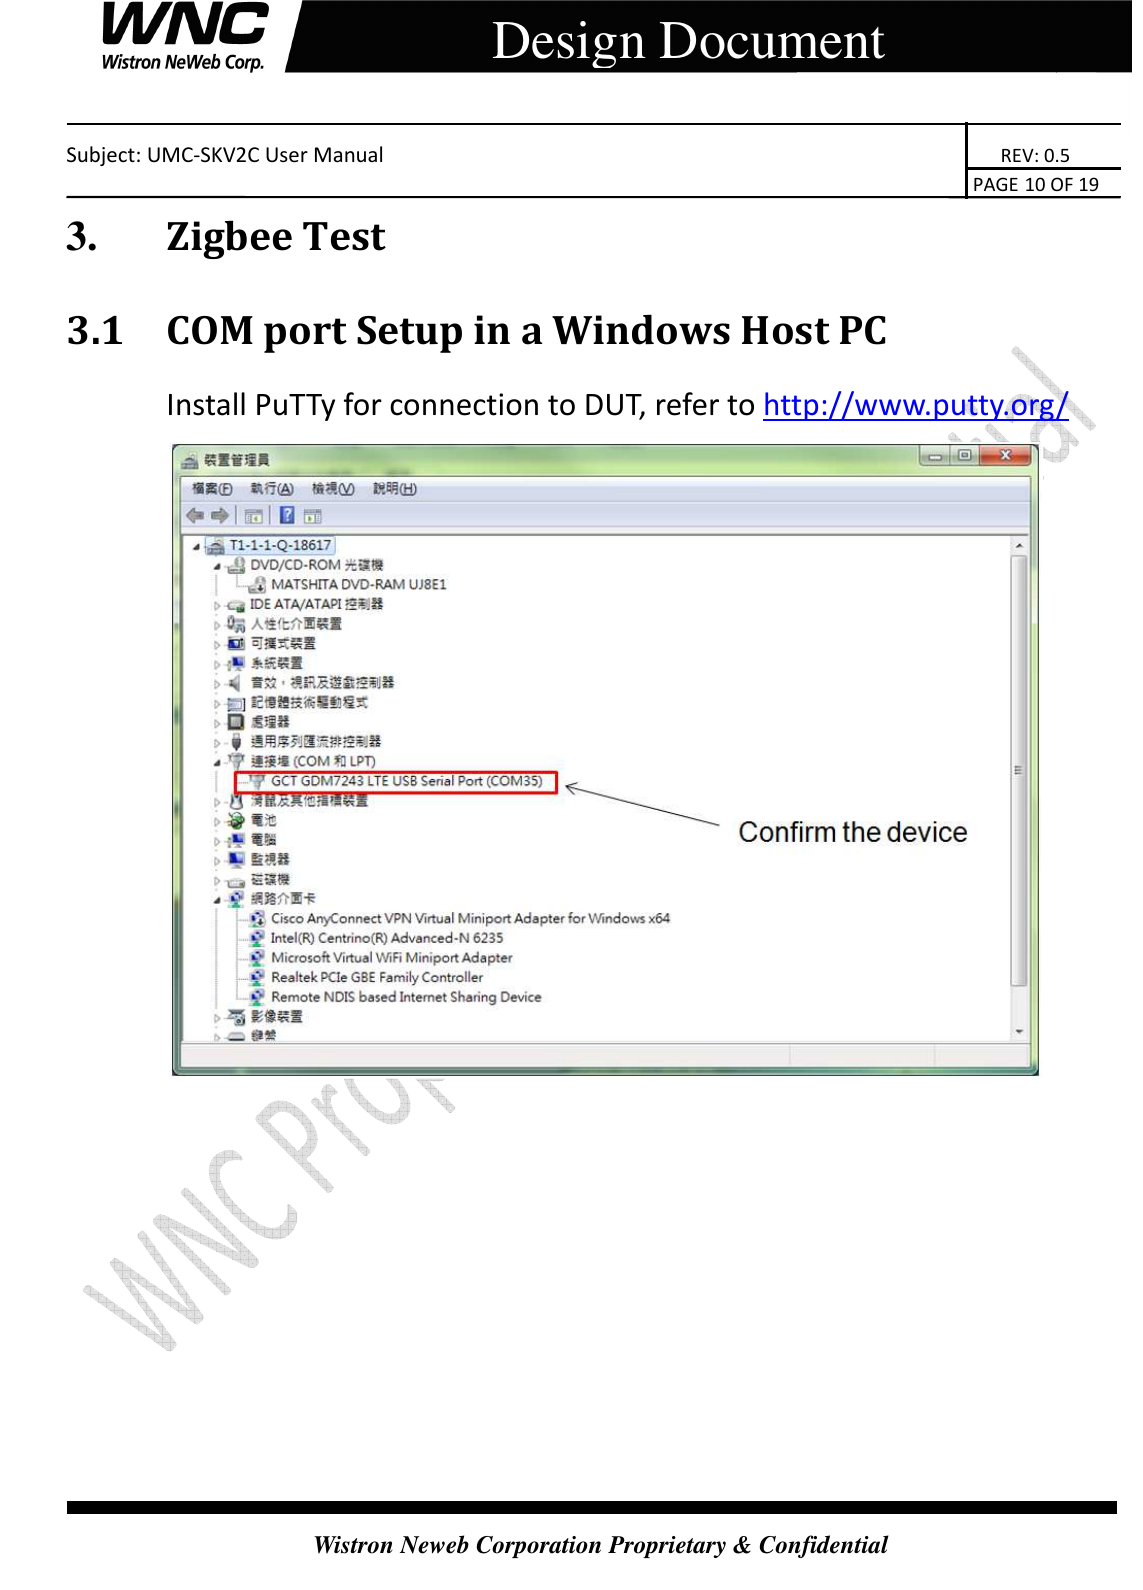    Subject: UMC-SKV2C User Manual                                                                       REV: 0.5                                                                                                                                                                               PAGE 10 OF 19  Wistron Neweb Corporation Proprietary &amp; Confidential     Design Document 3.       Zigbee Test 3.1 COM port Setup in a Windows Host PC Install PuTTy for connection to DUT, refer to http://www.putty.org/  